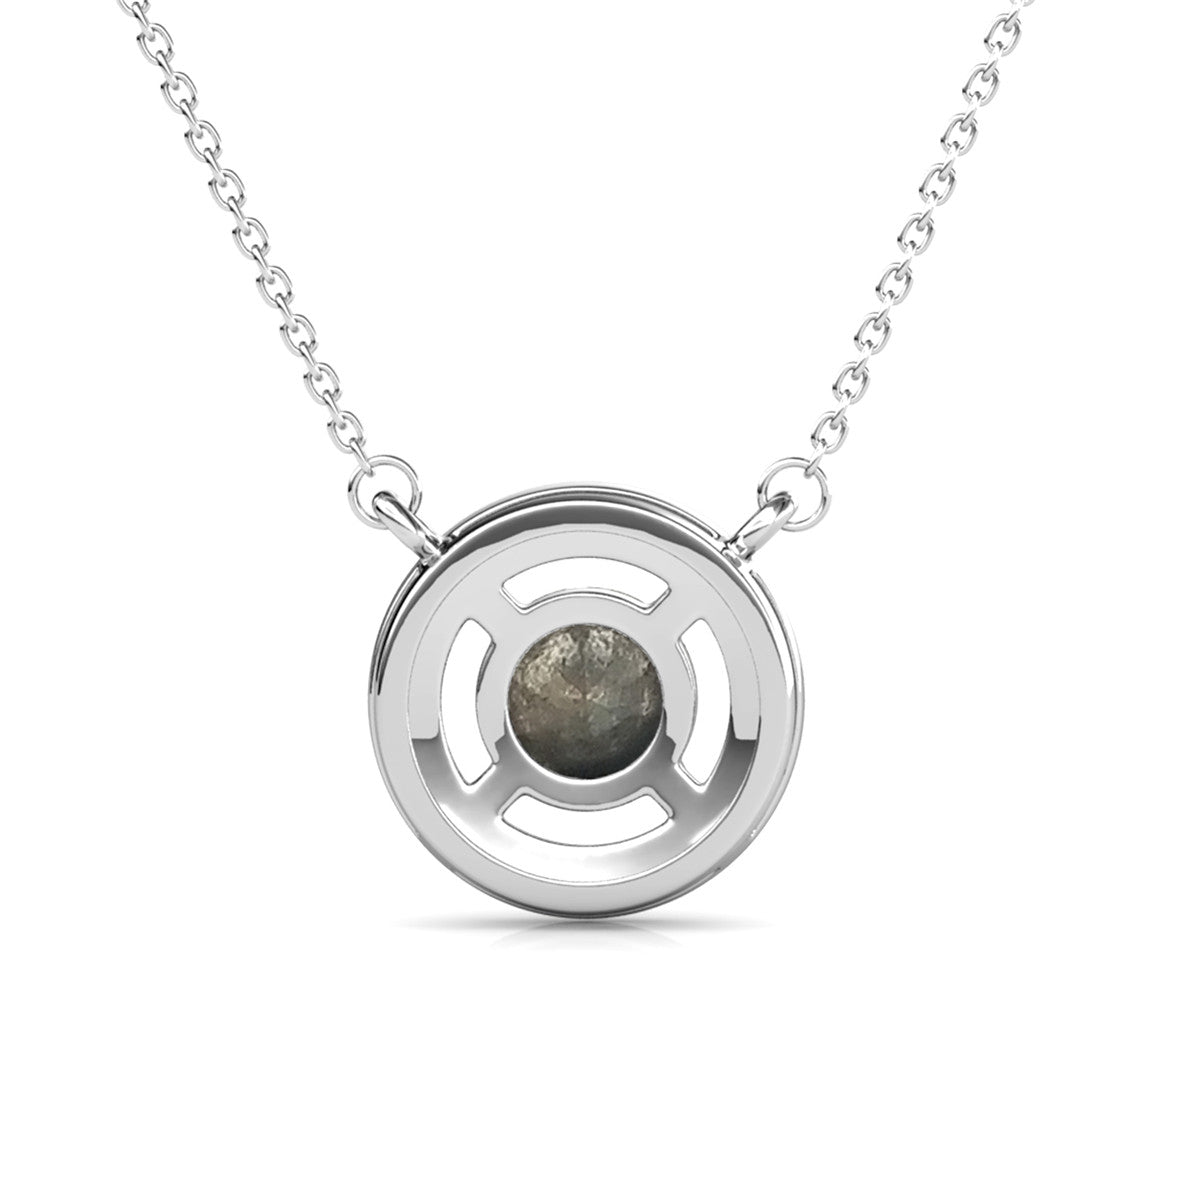 Royal June Birthstone Alexandrite Necklace, 18k White Gold Plated Silver Halo Necklace with Round Cut Crystal